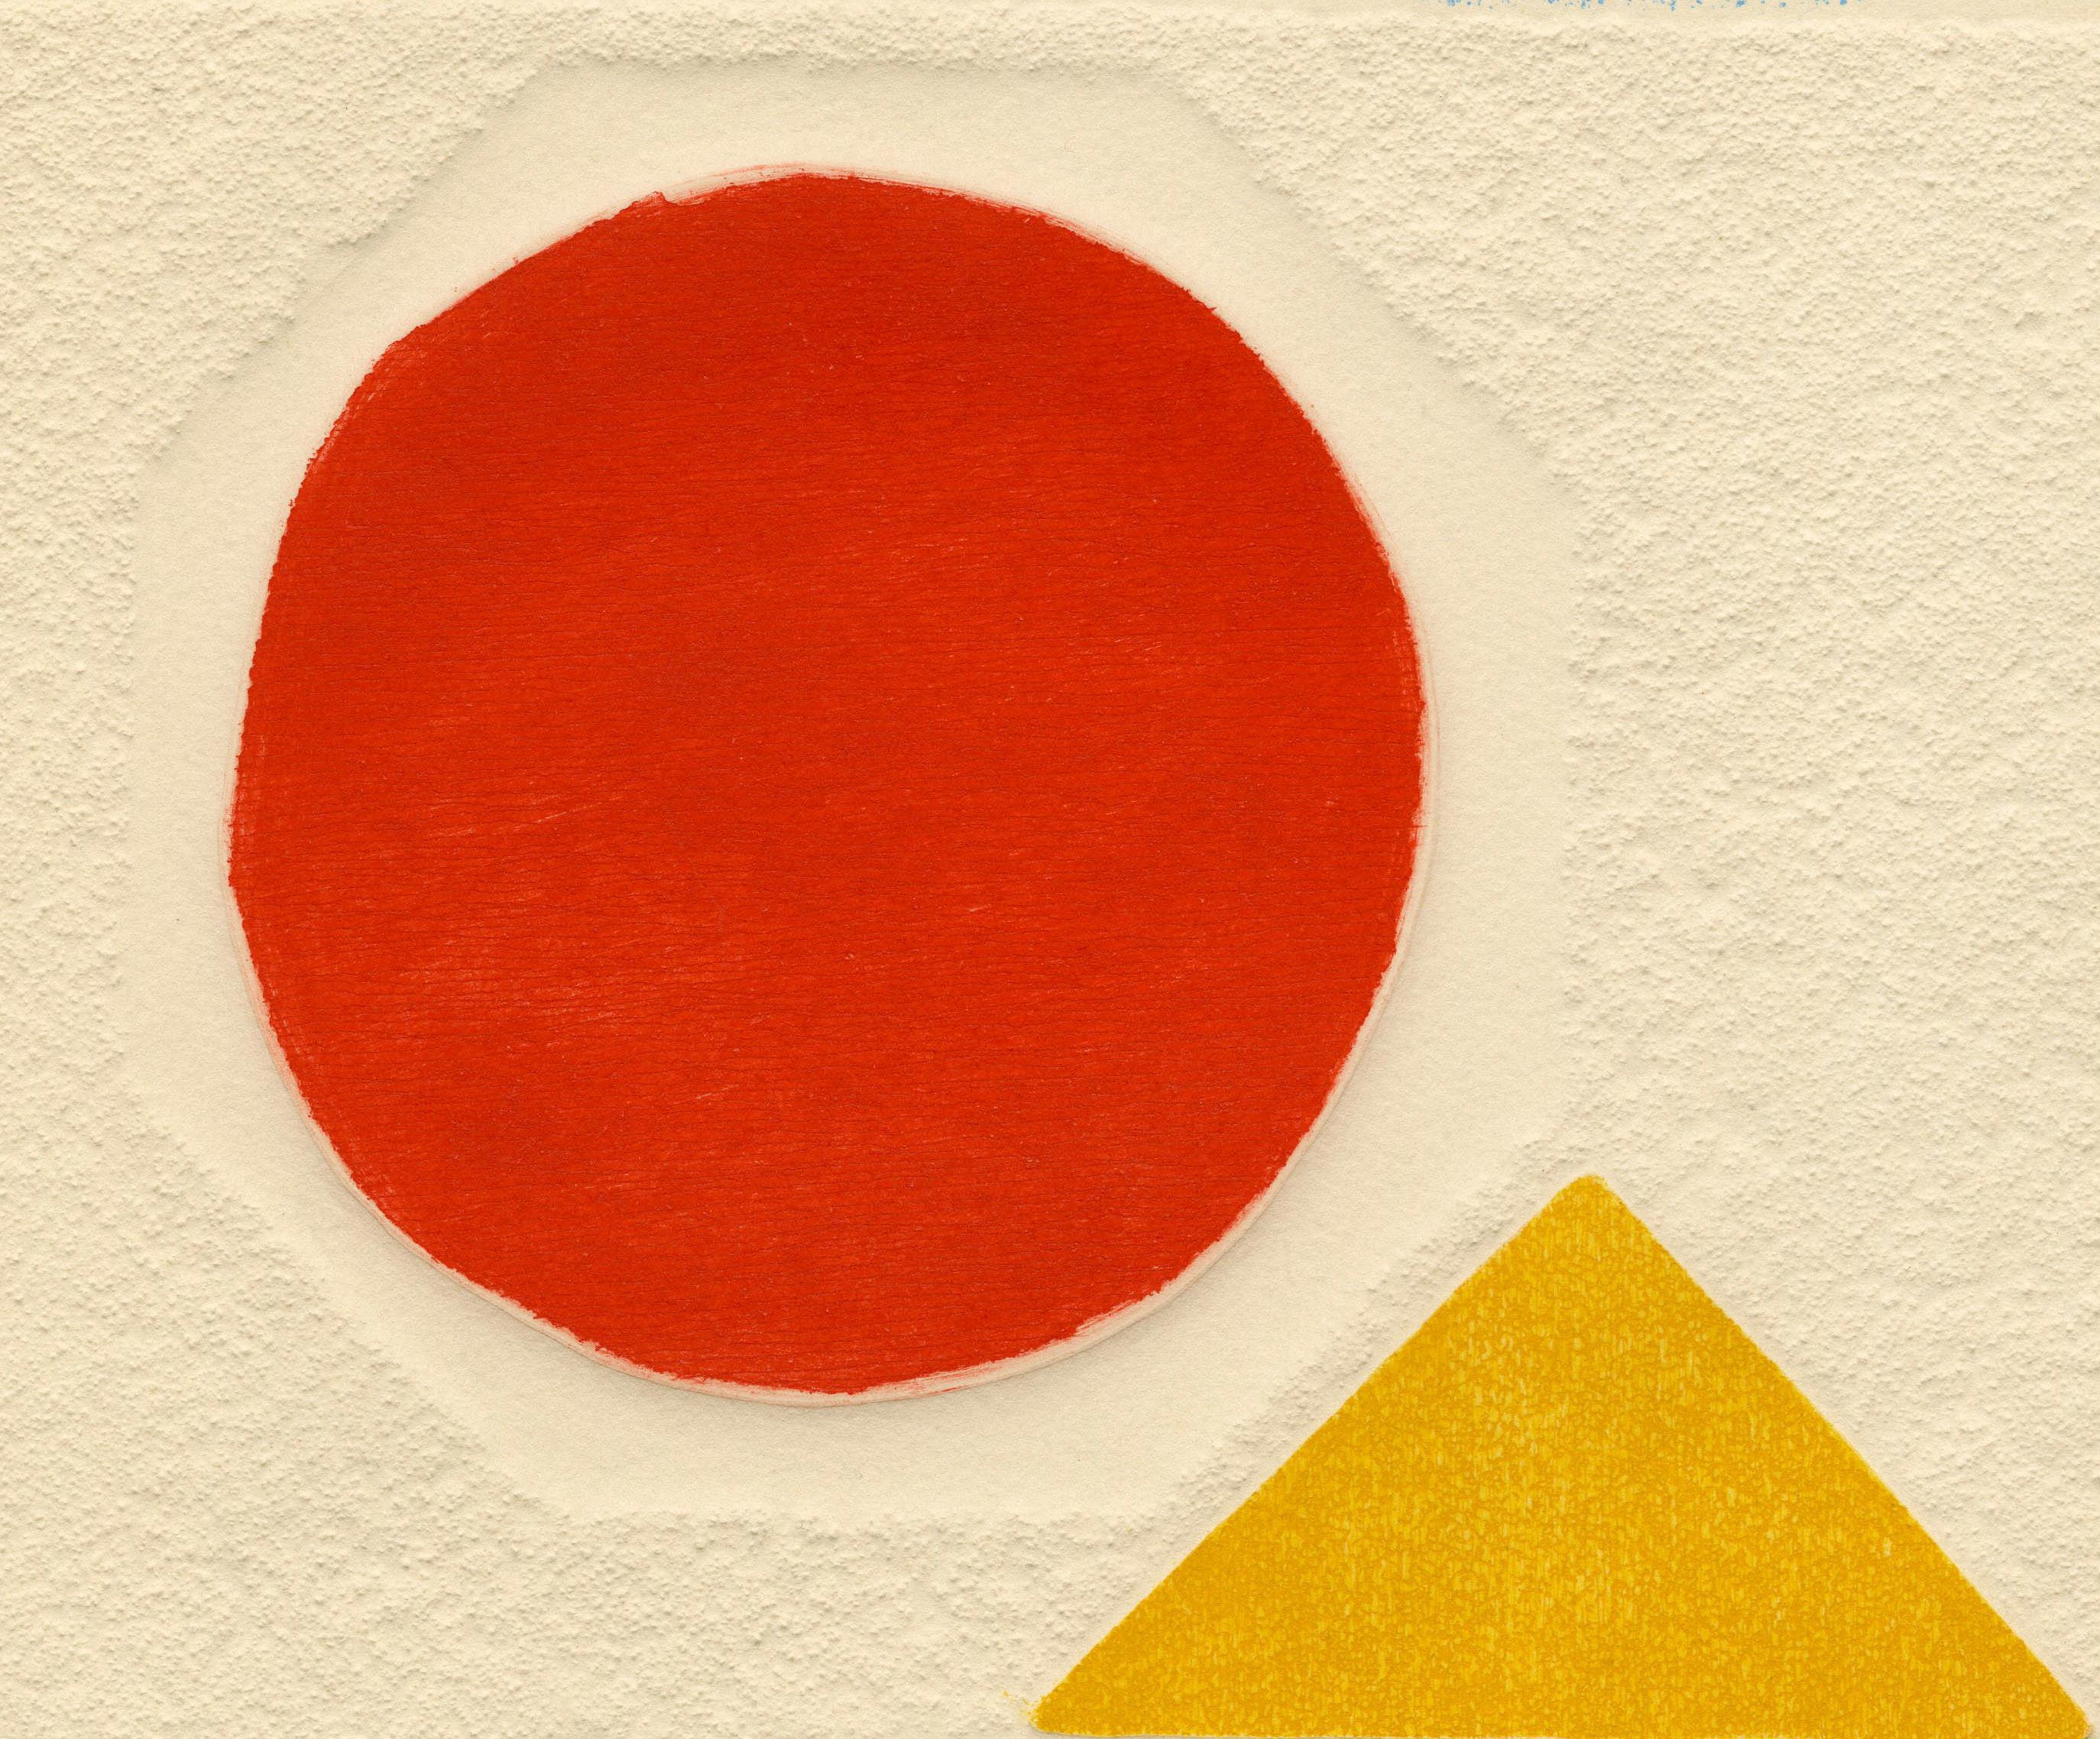 Soleil rouge (Red Sun) - Abstract Print by Raoul Lazar